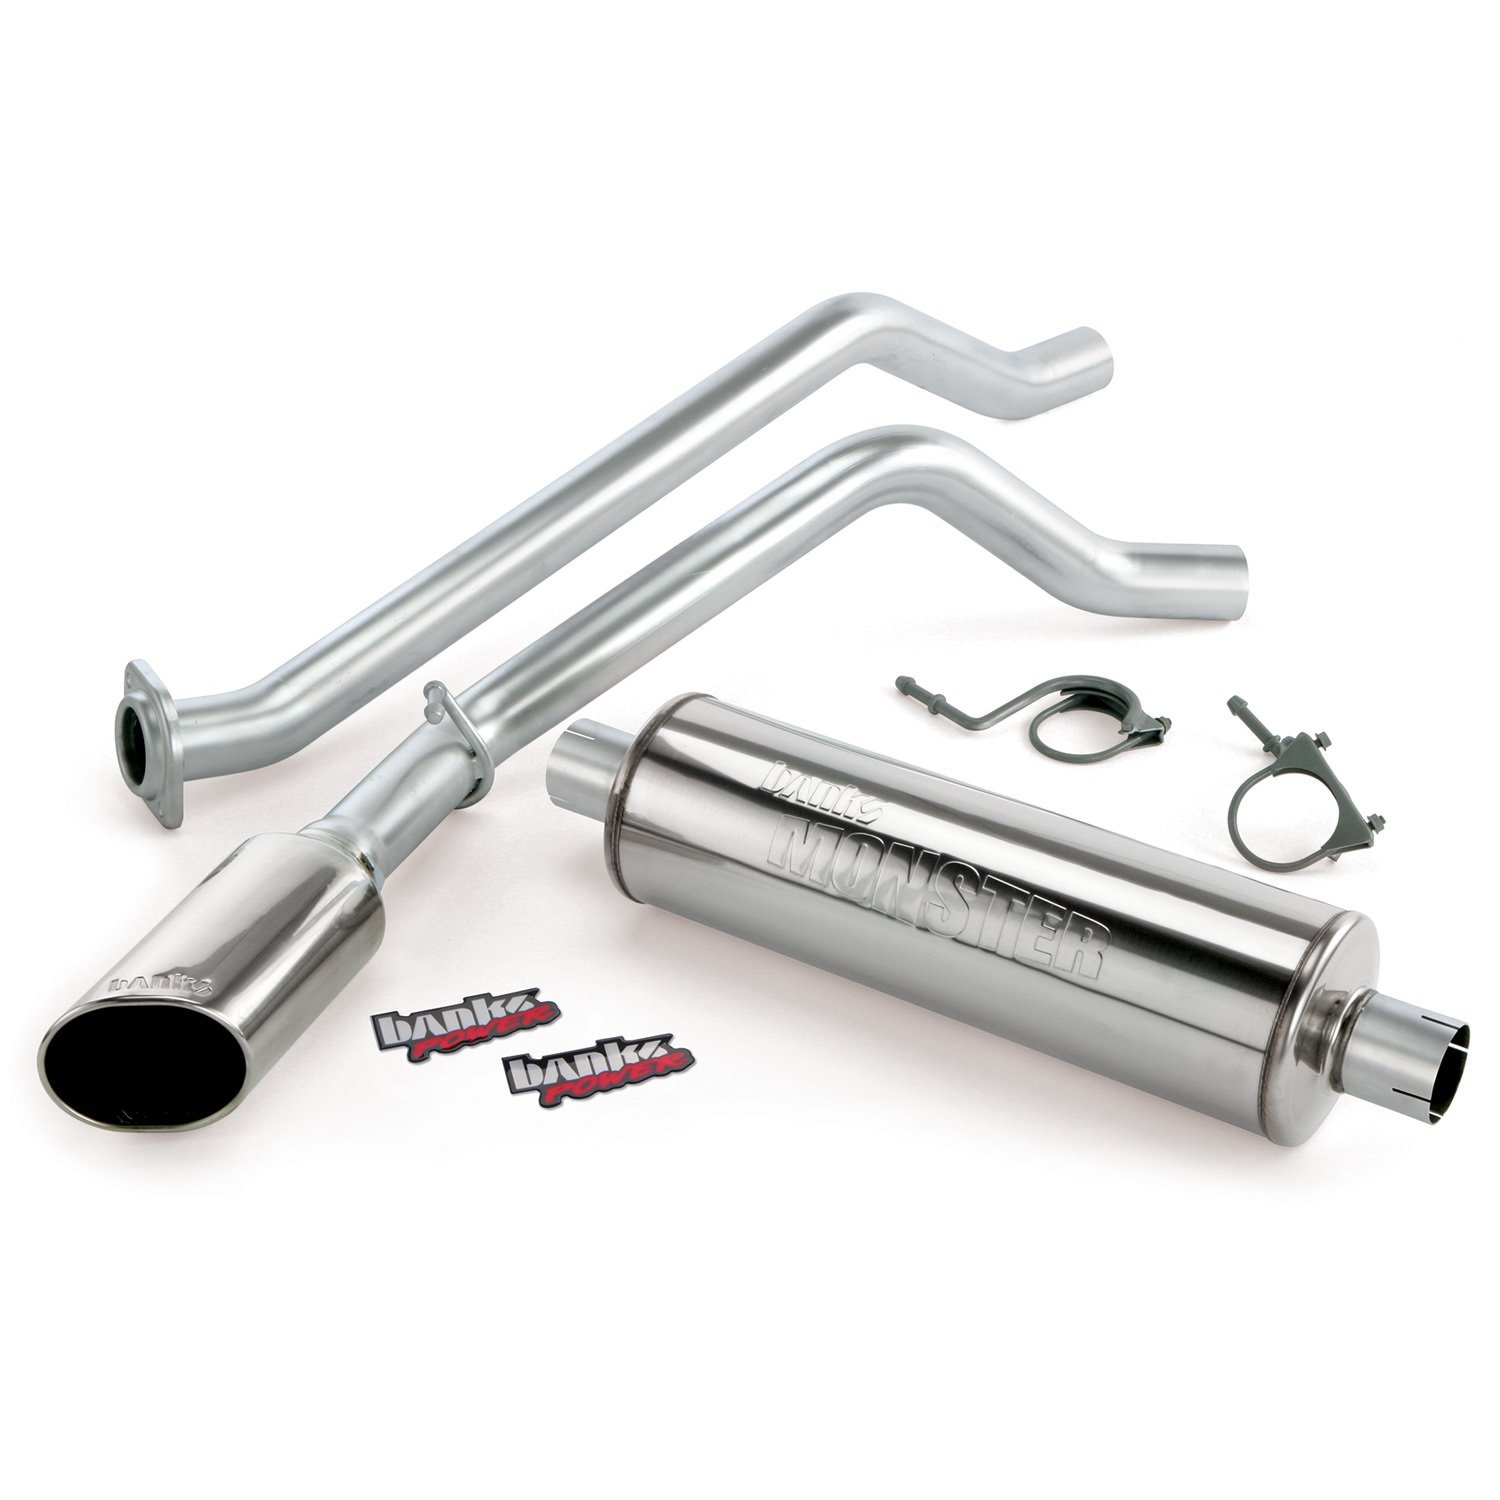 Banks Power 48350 Single Monster Exhaust System for 10-11 Chevy